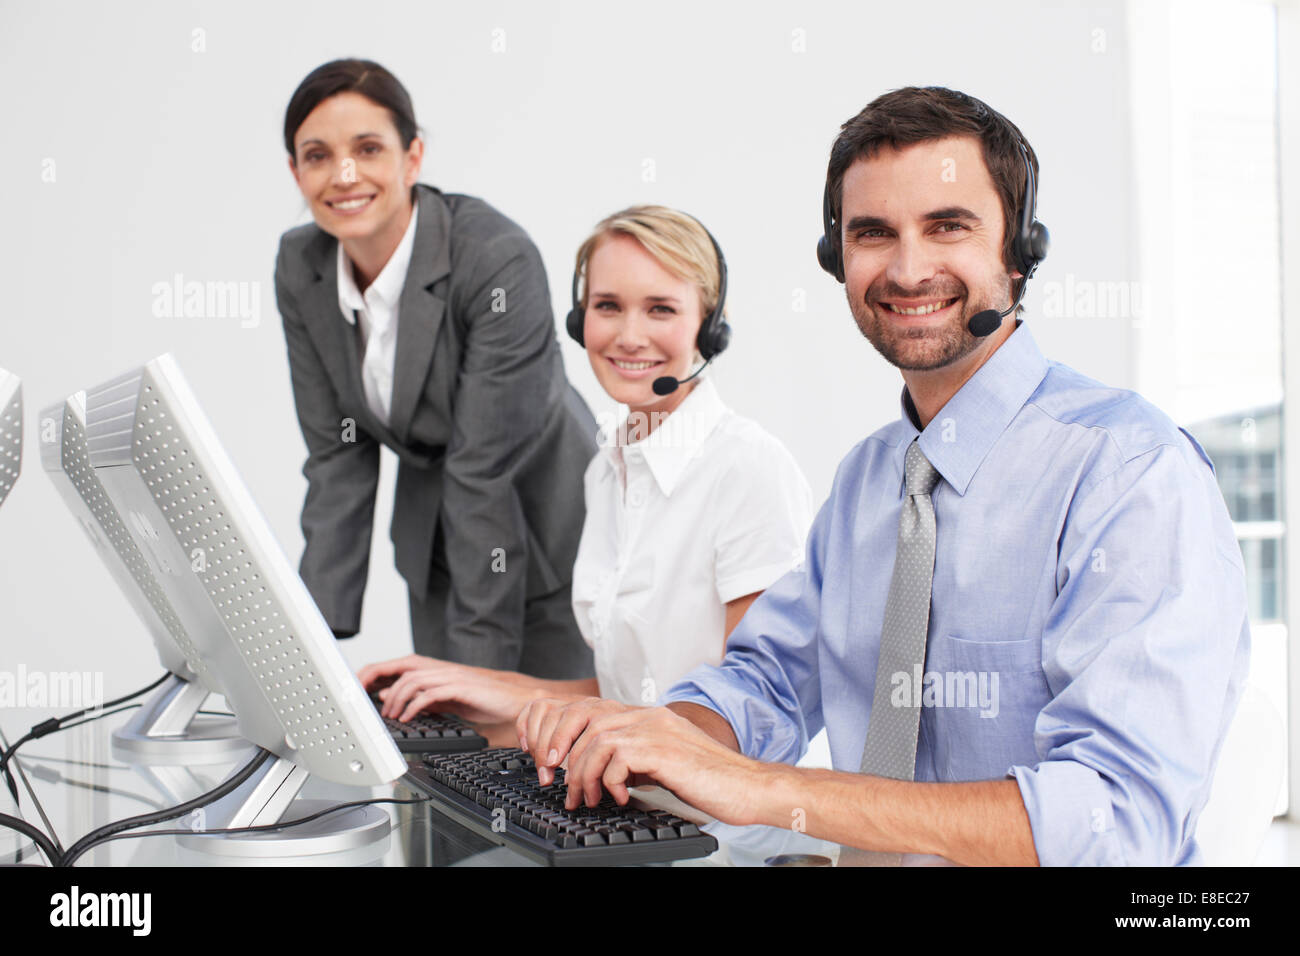 Customer support agents Stock Photo